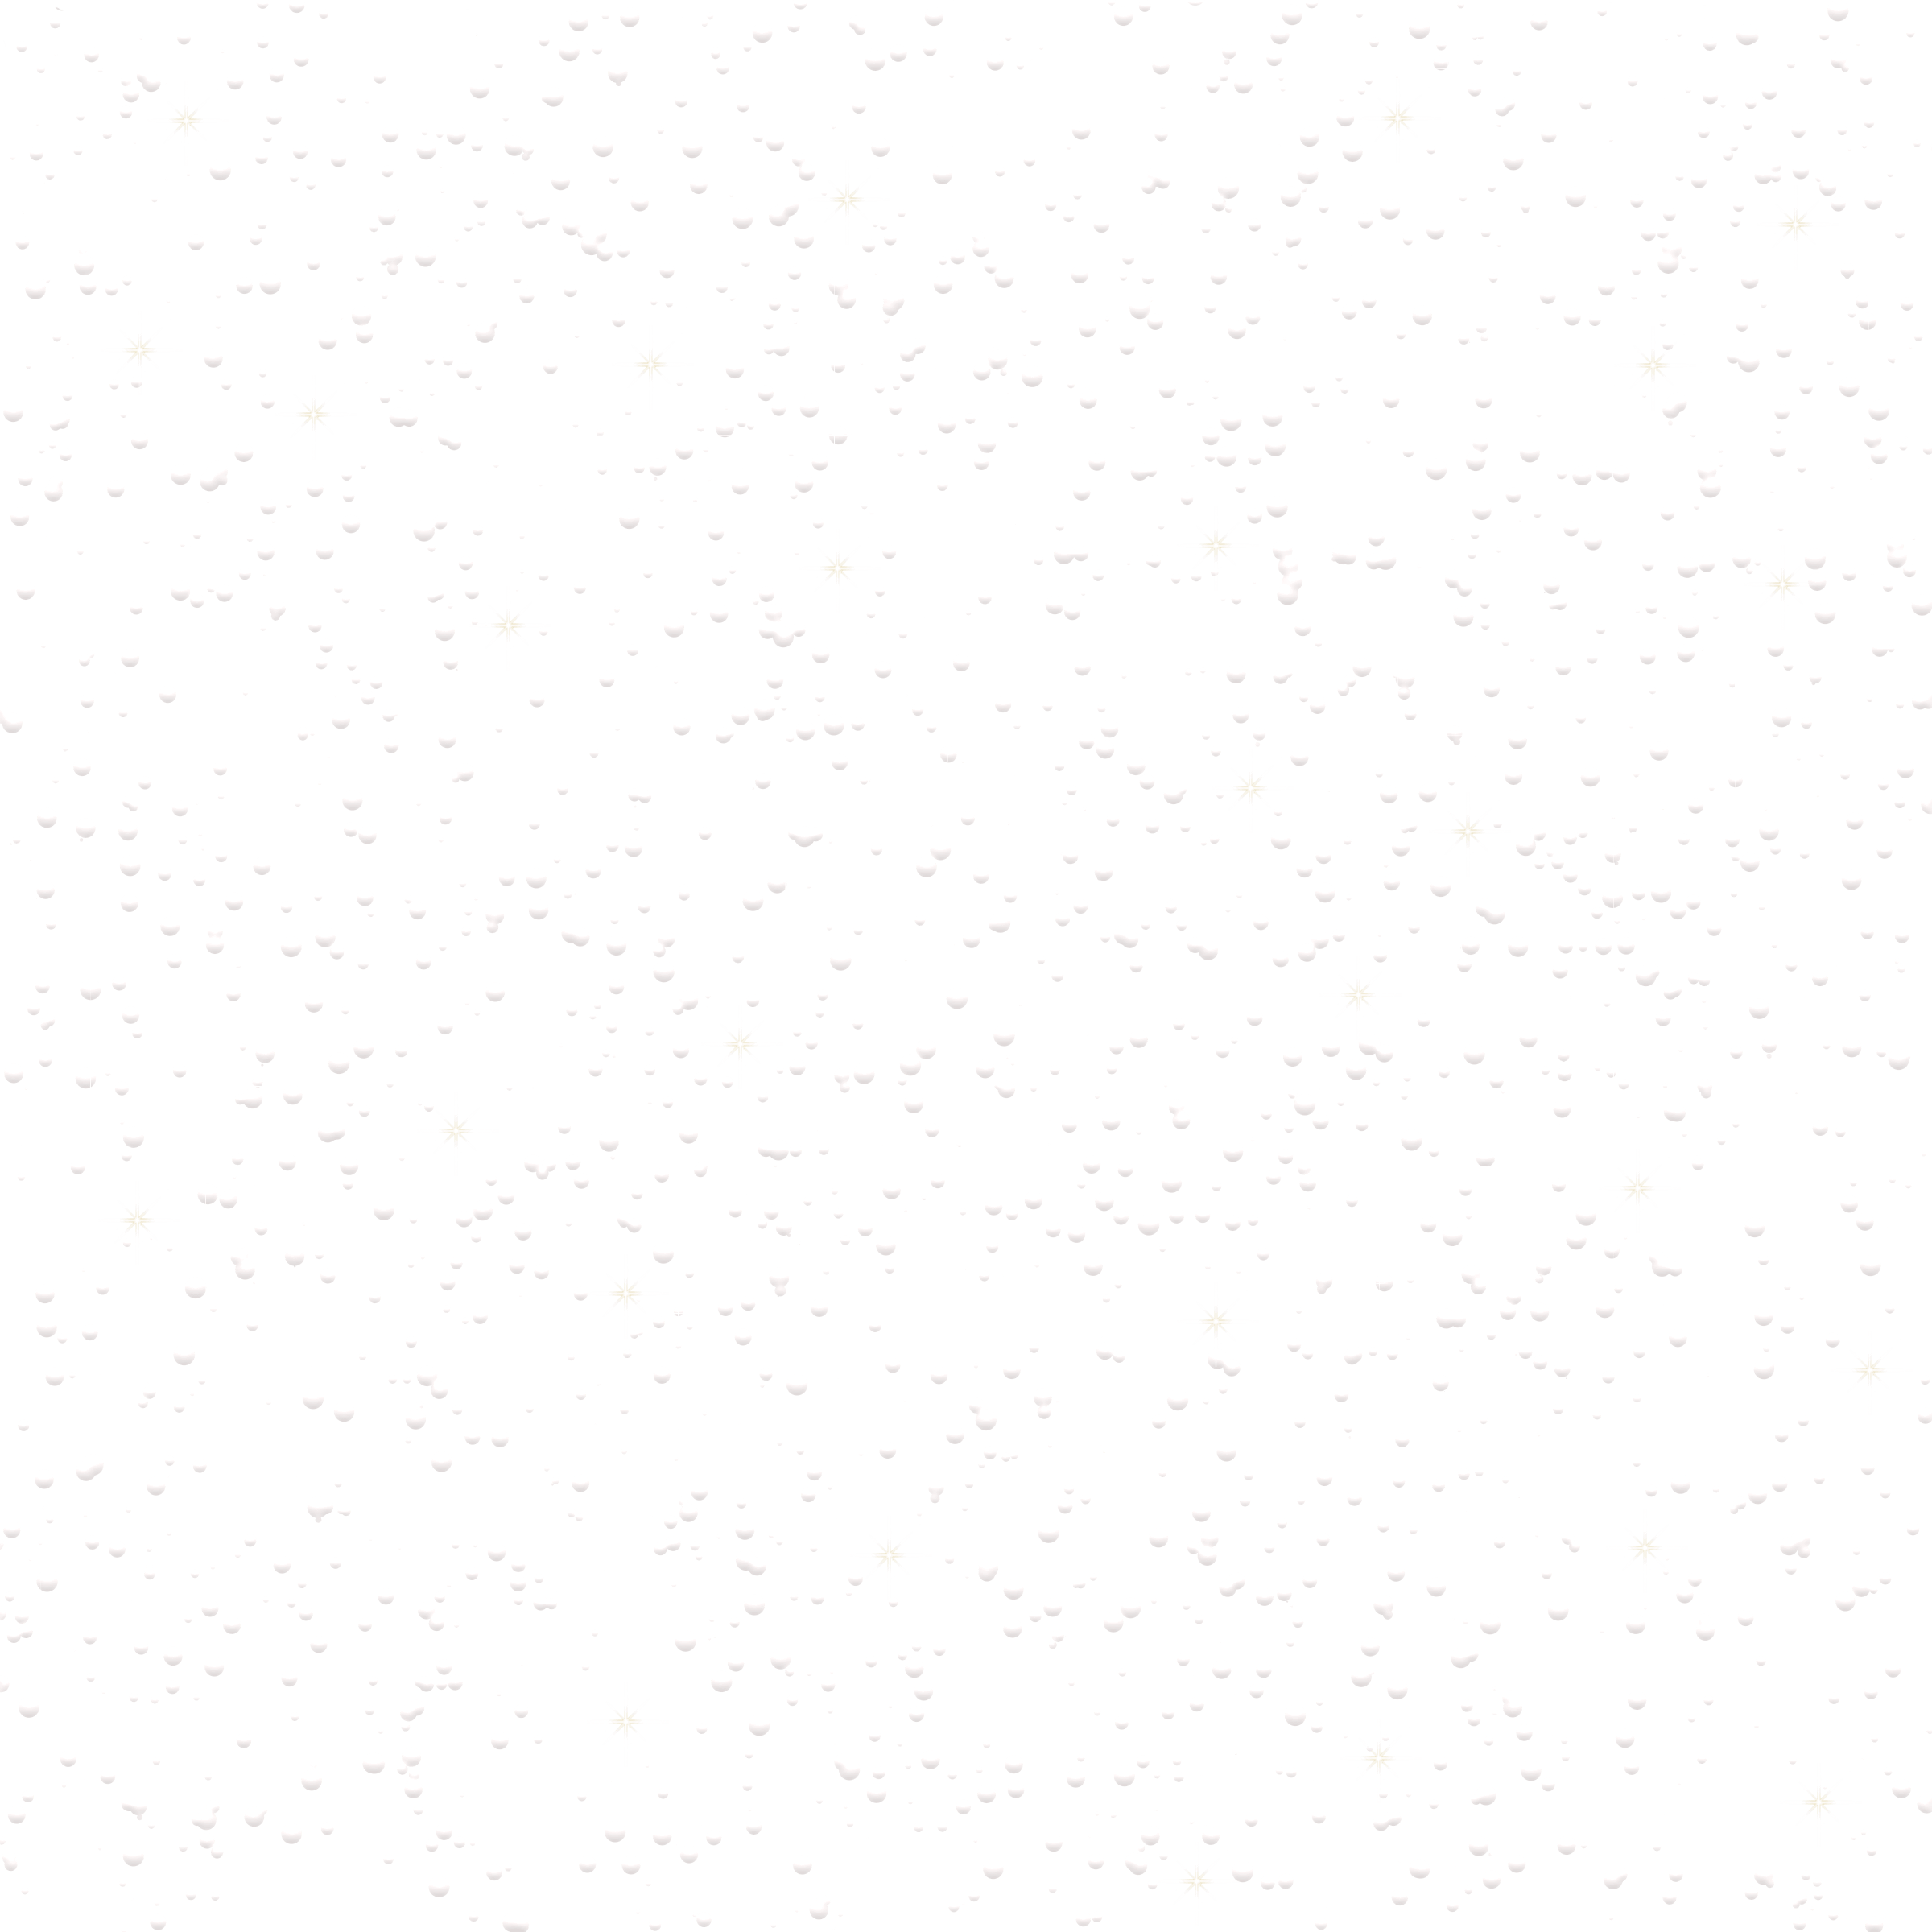 Transparent_Snow_with_Shining_Effect.png?m=1399672800